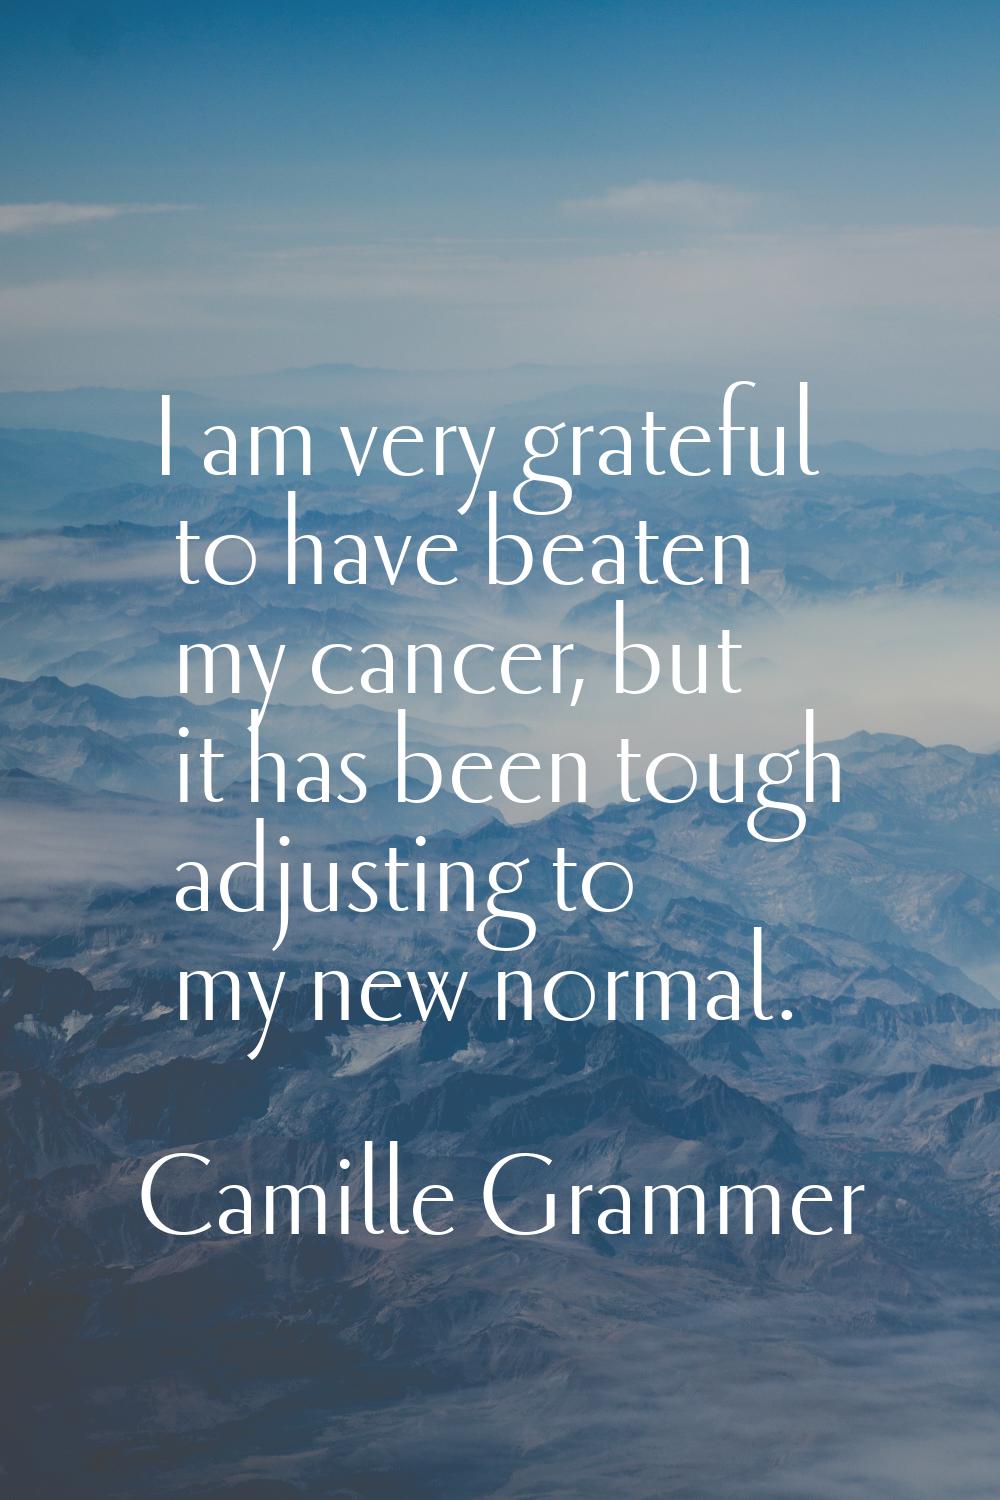 I am very grateful to have beaten my cancer, but it has been tough adjusting to my new normal.